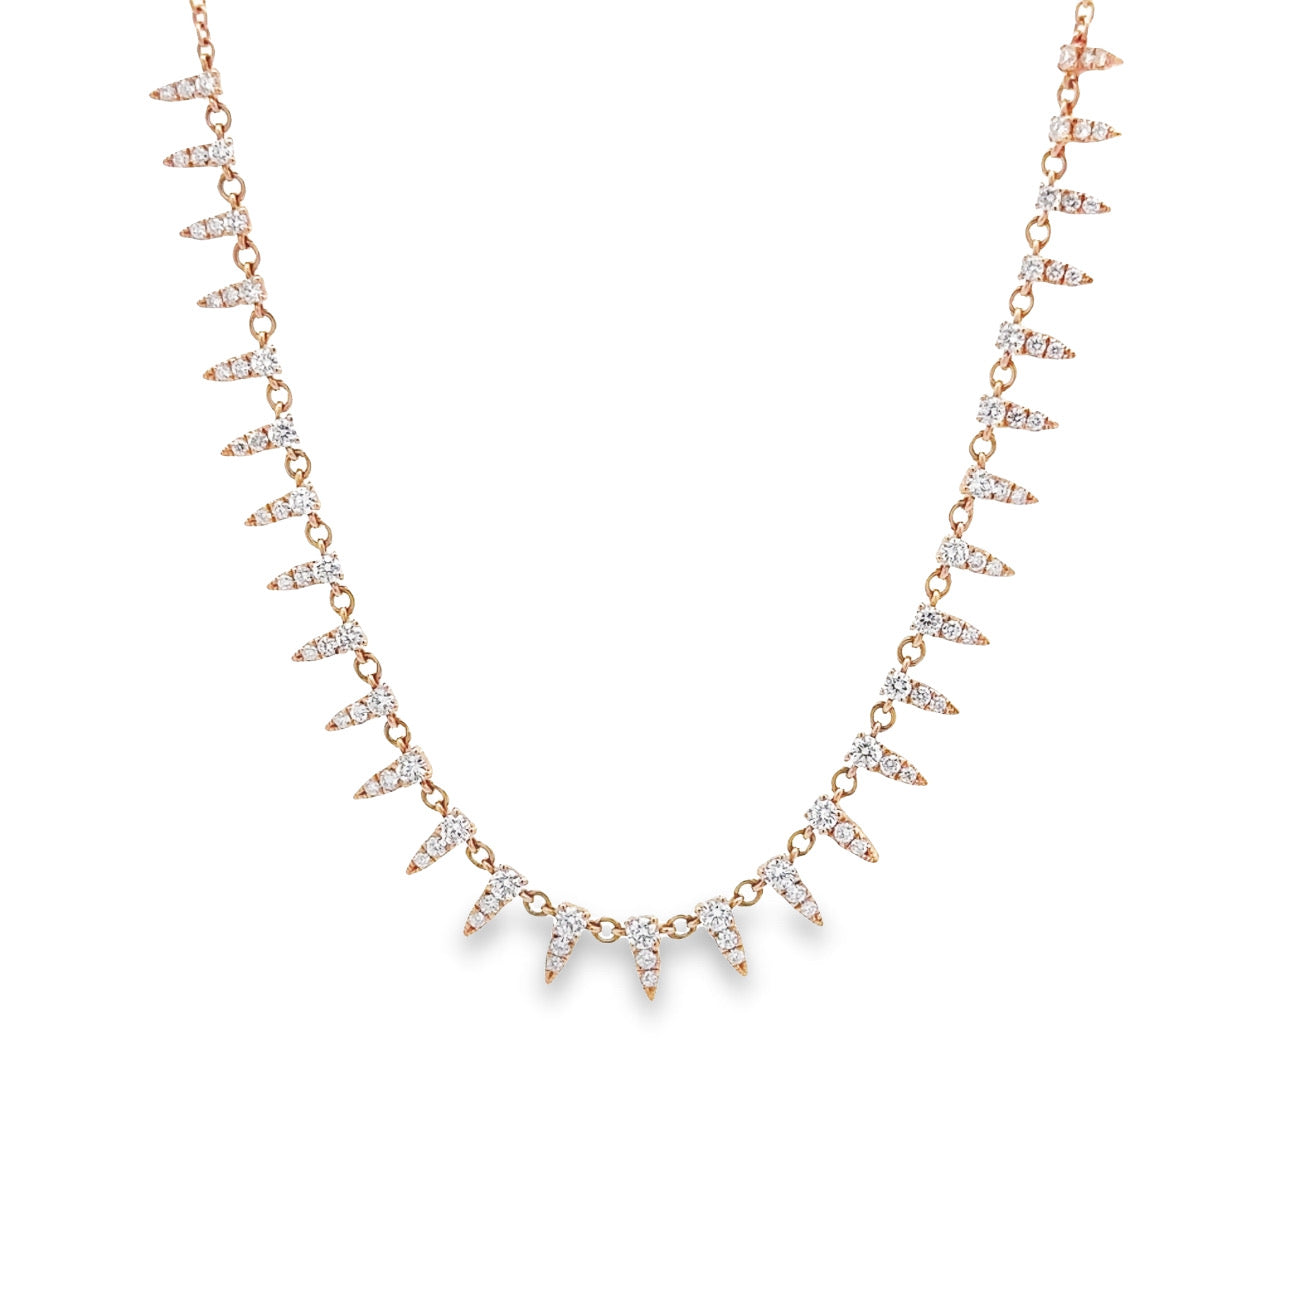 WD926 14kt gold 1.20ct of round diamonds necklace